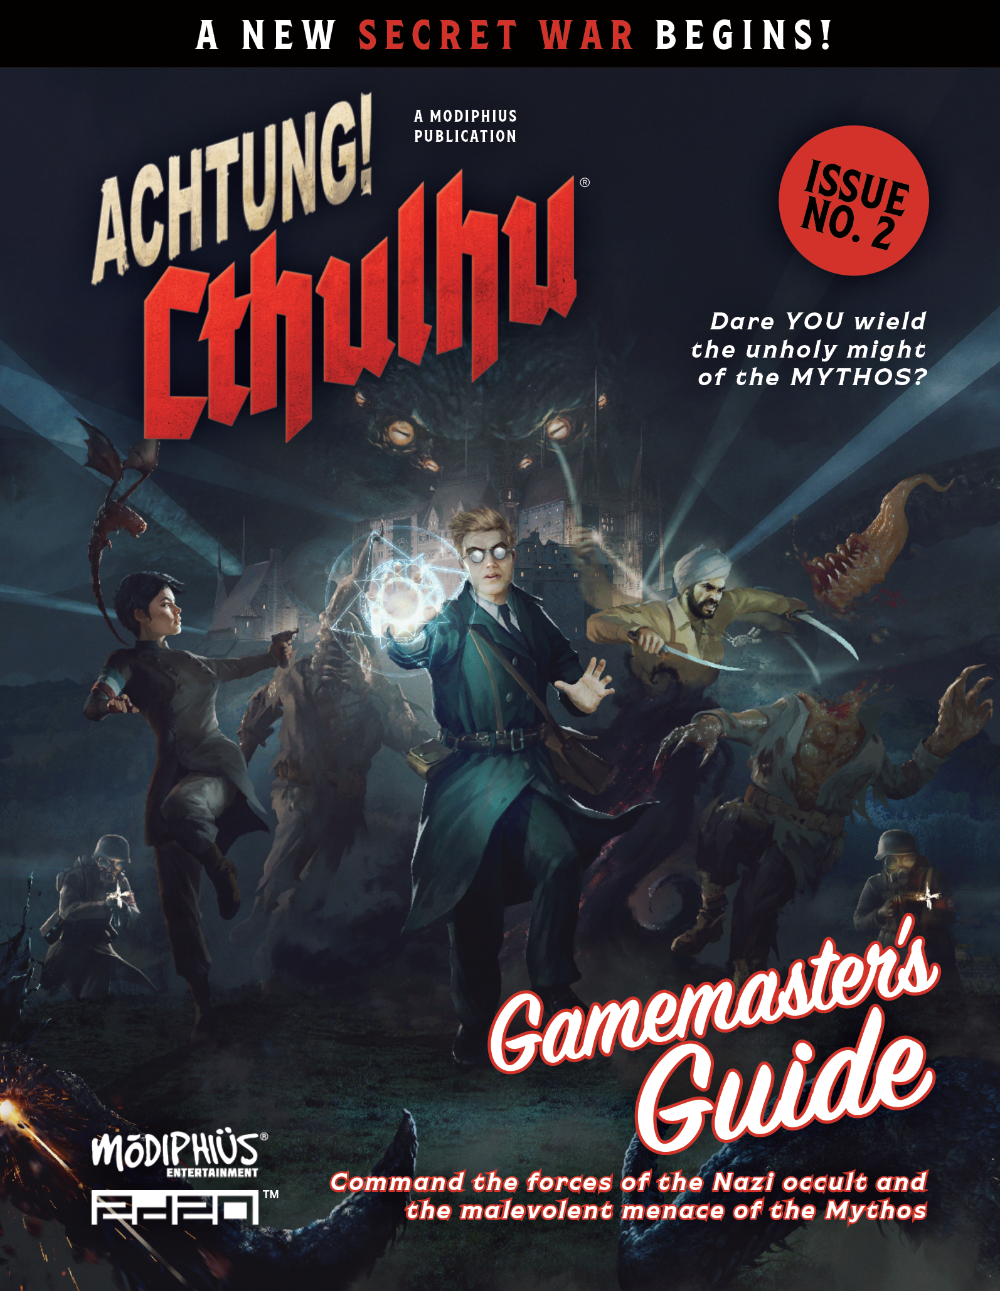 Achtung! Cthulhu RPG: GAMEMASTERS GUIDE 